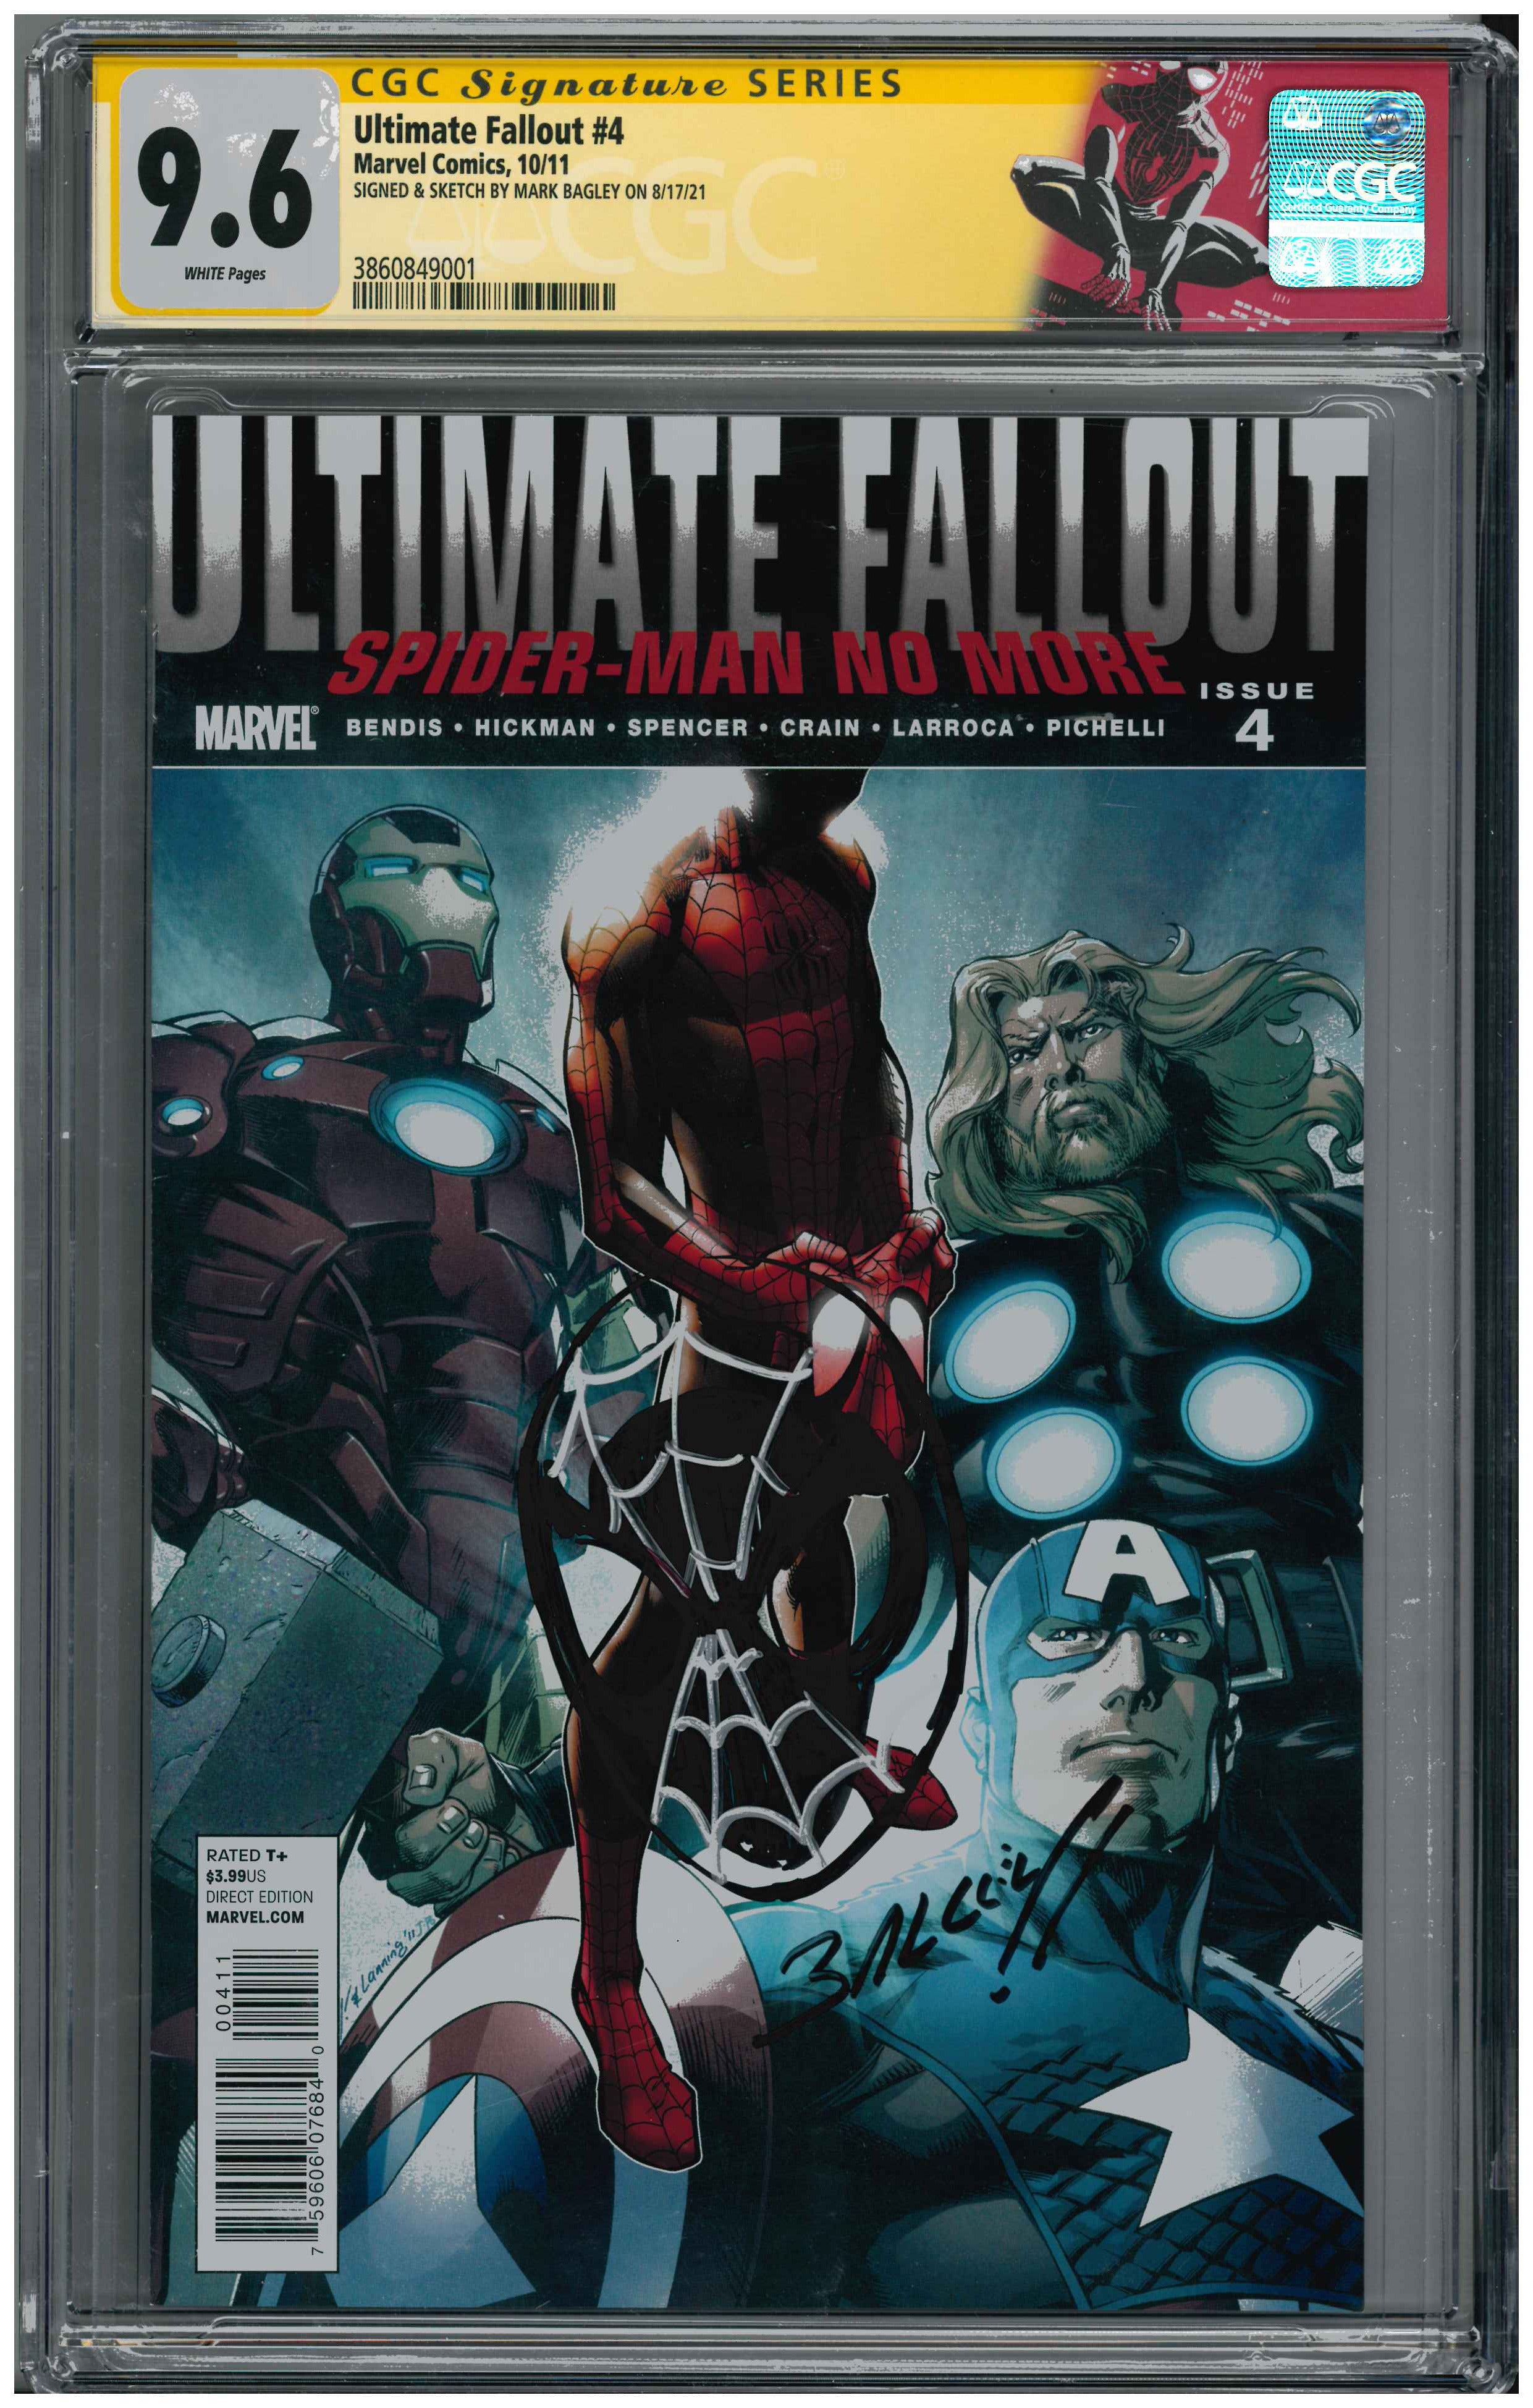 Ultimate Fallout #4 | Signed & Sketched by Mark Bagley